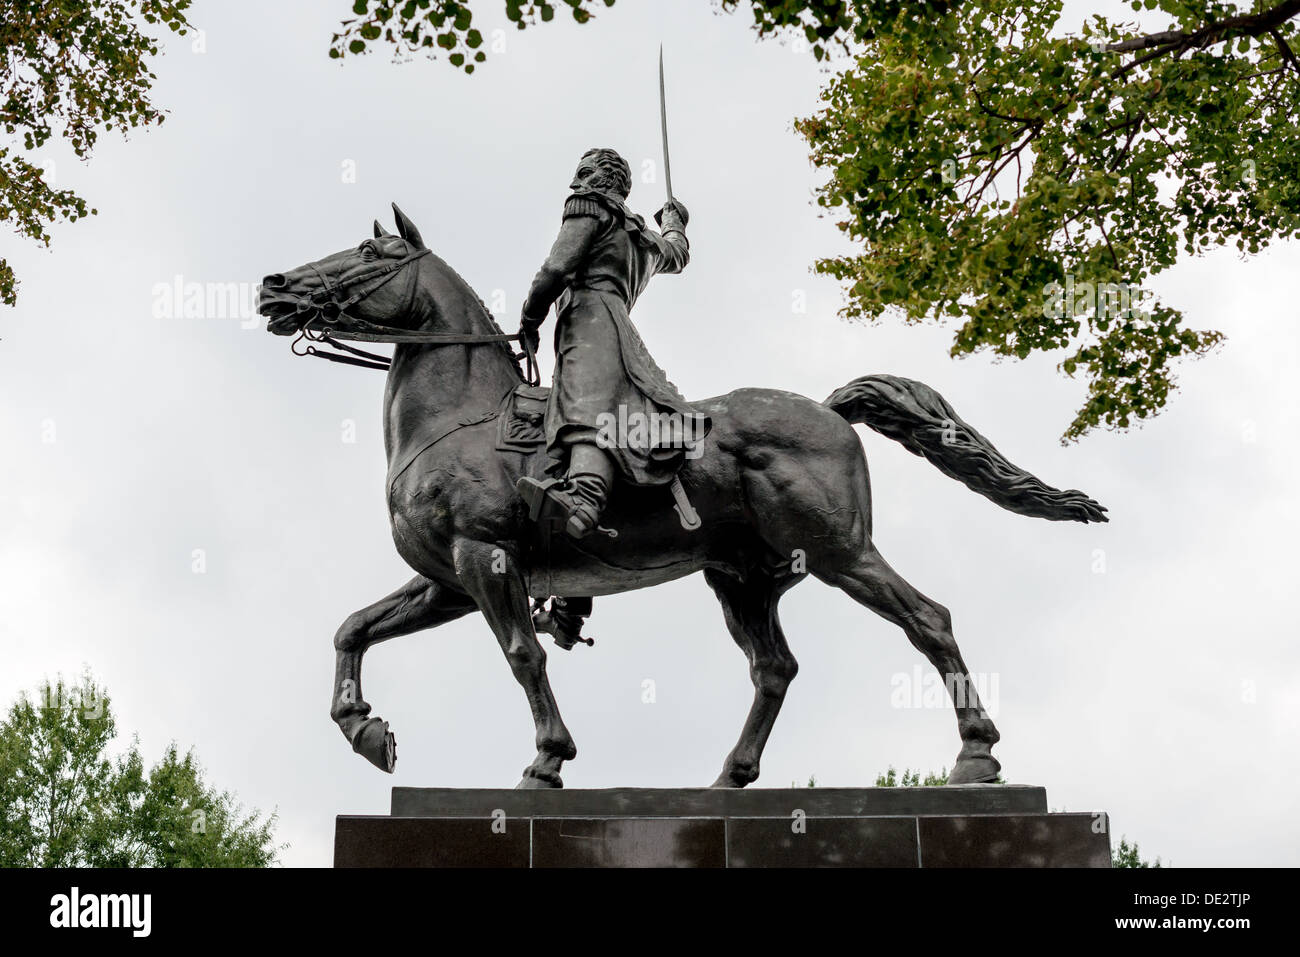 WASHINGTON DC, USA - A large statue of Venezuelan leader Simon Bolivar, by Felix de Weldon, that stands in a park in front of the Interior Department in Foggy Bottom in northwest Washington DC. The statue was installed as a gift of the Venezuelan Government in 1955 and is formally titled Equestrian of Simon Bolivar. Stock Photo